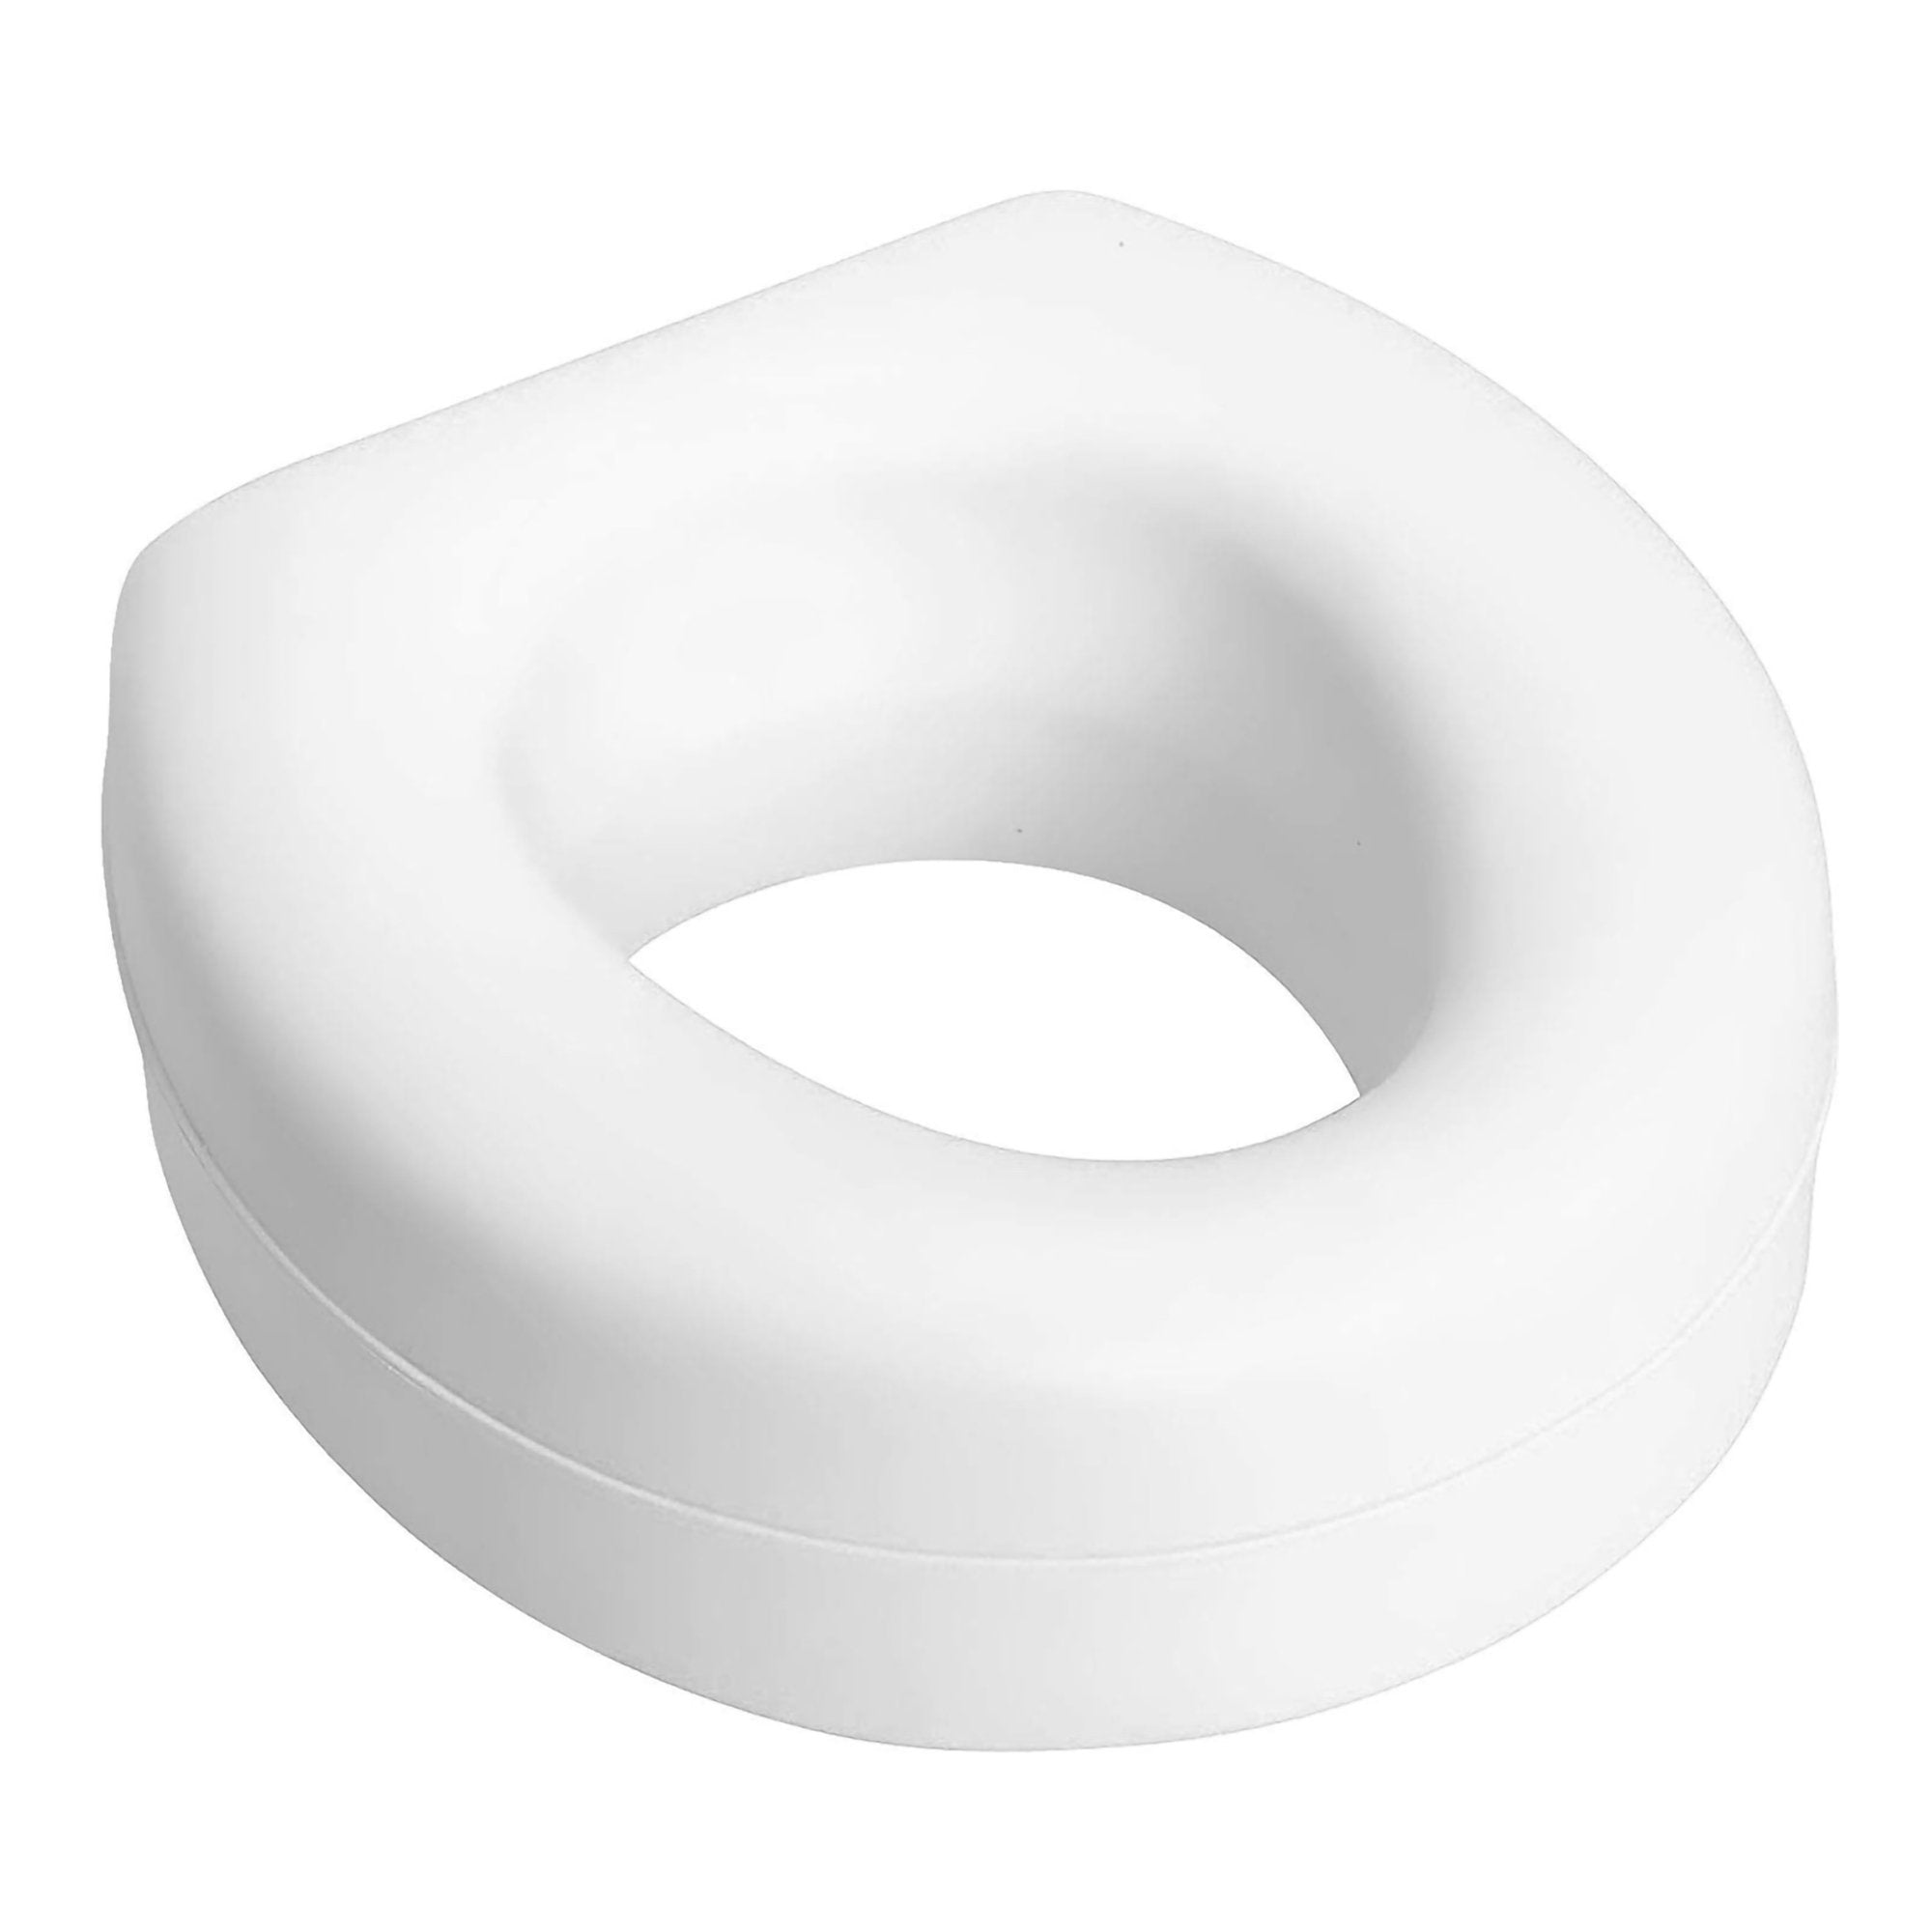 Raised Toilet Seat HealthSmart 5 Inch Height White 250 lbs. Weight Capacity.